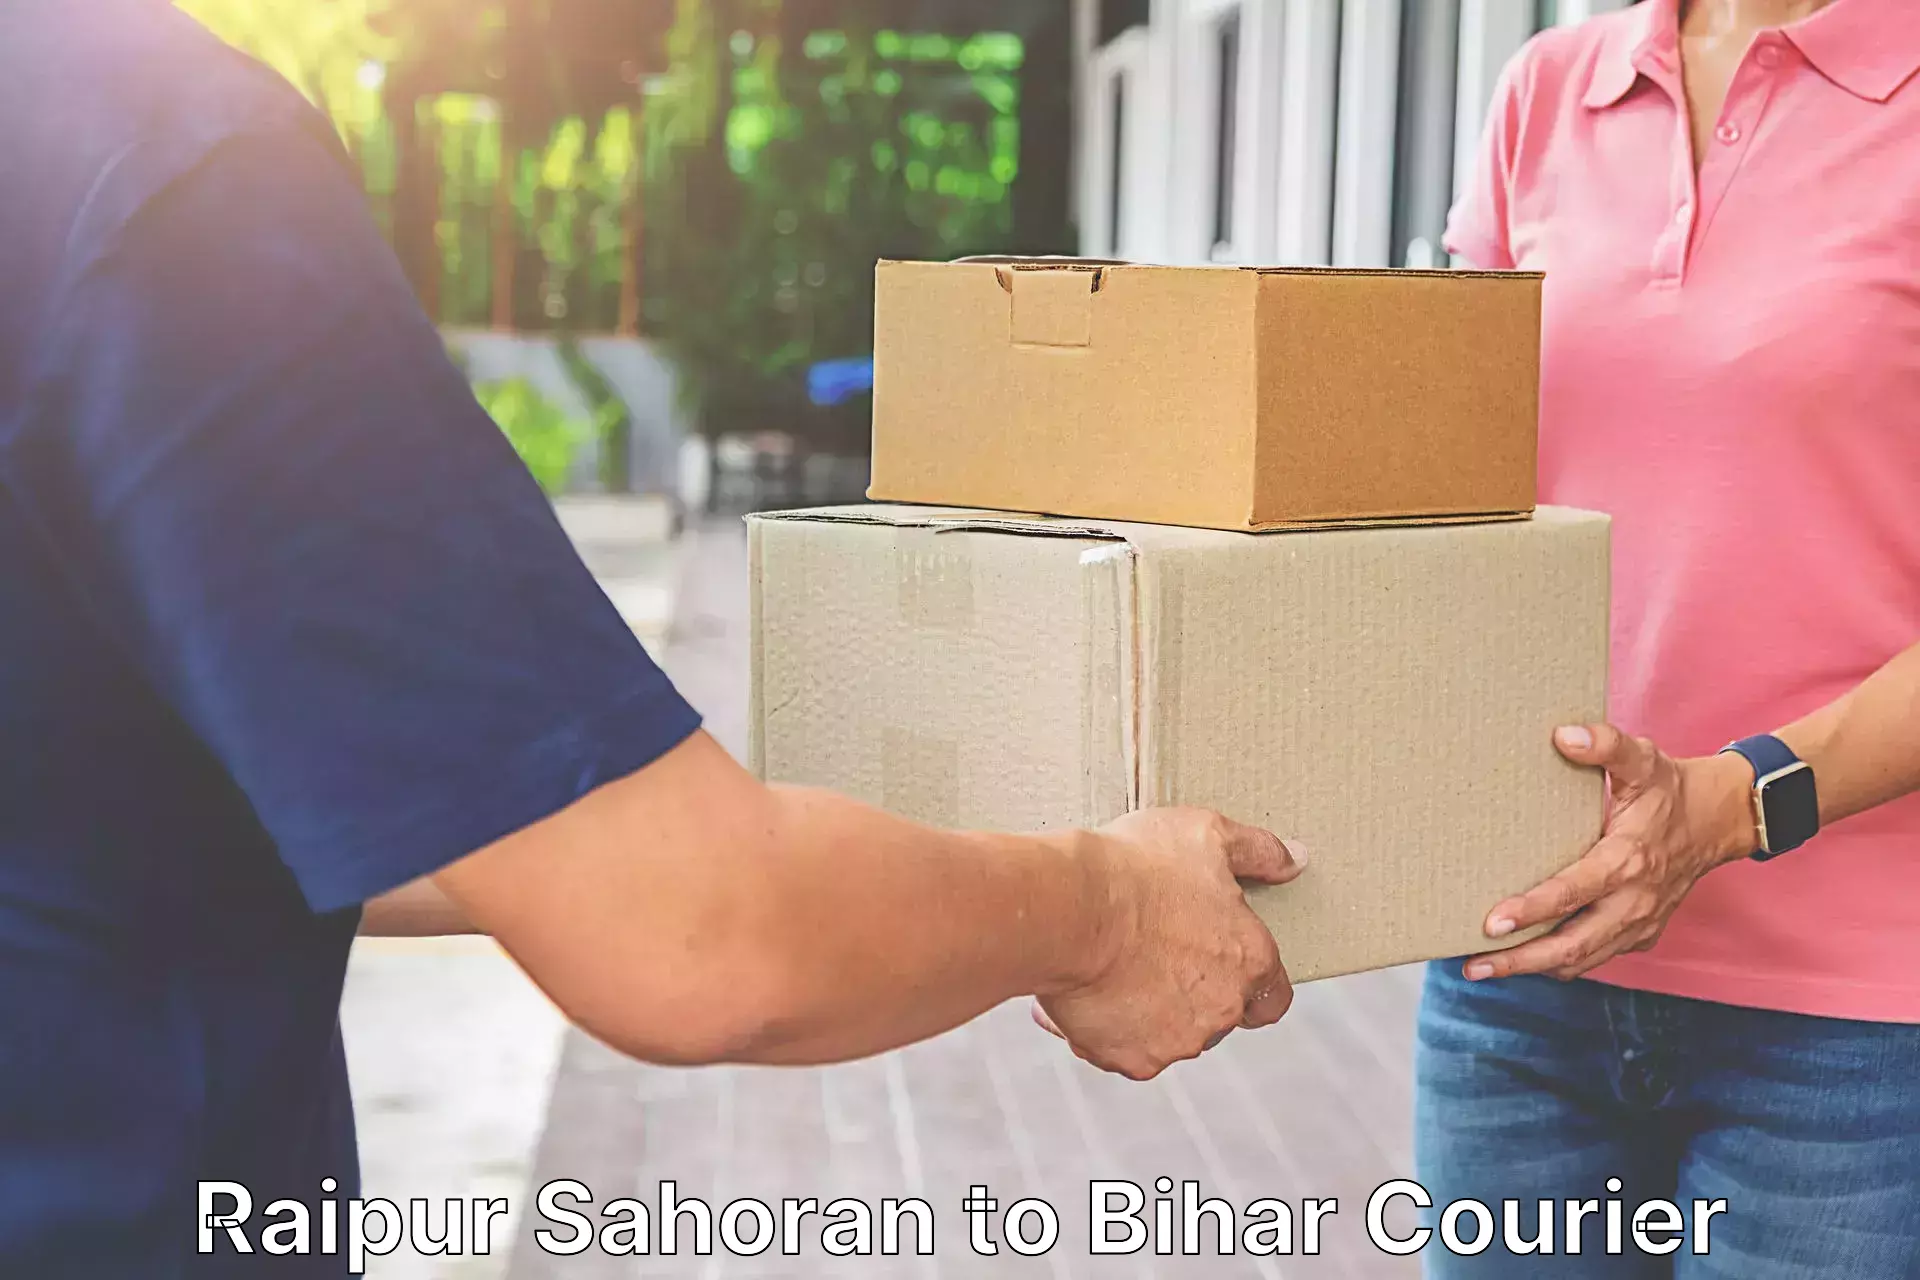 Reliable courier service in Raipur Sahoran to Fatwah